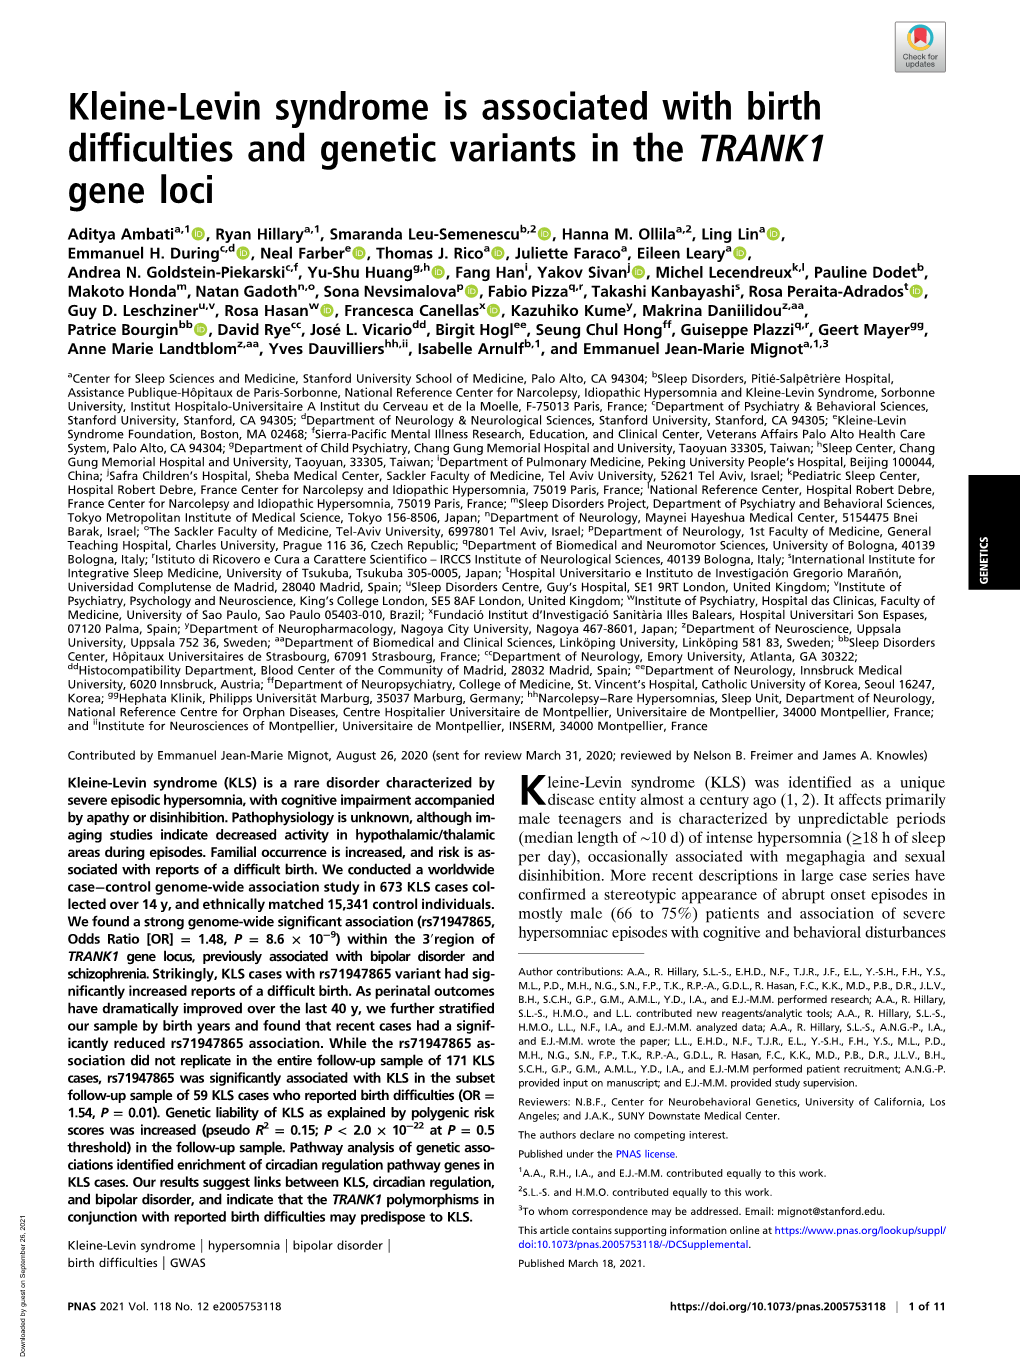 Kleine-Levin Syndrome Is Associated with Birth Difficulties and Genetic Variants in the TRANK1 Gene Loci